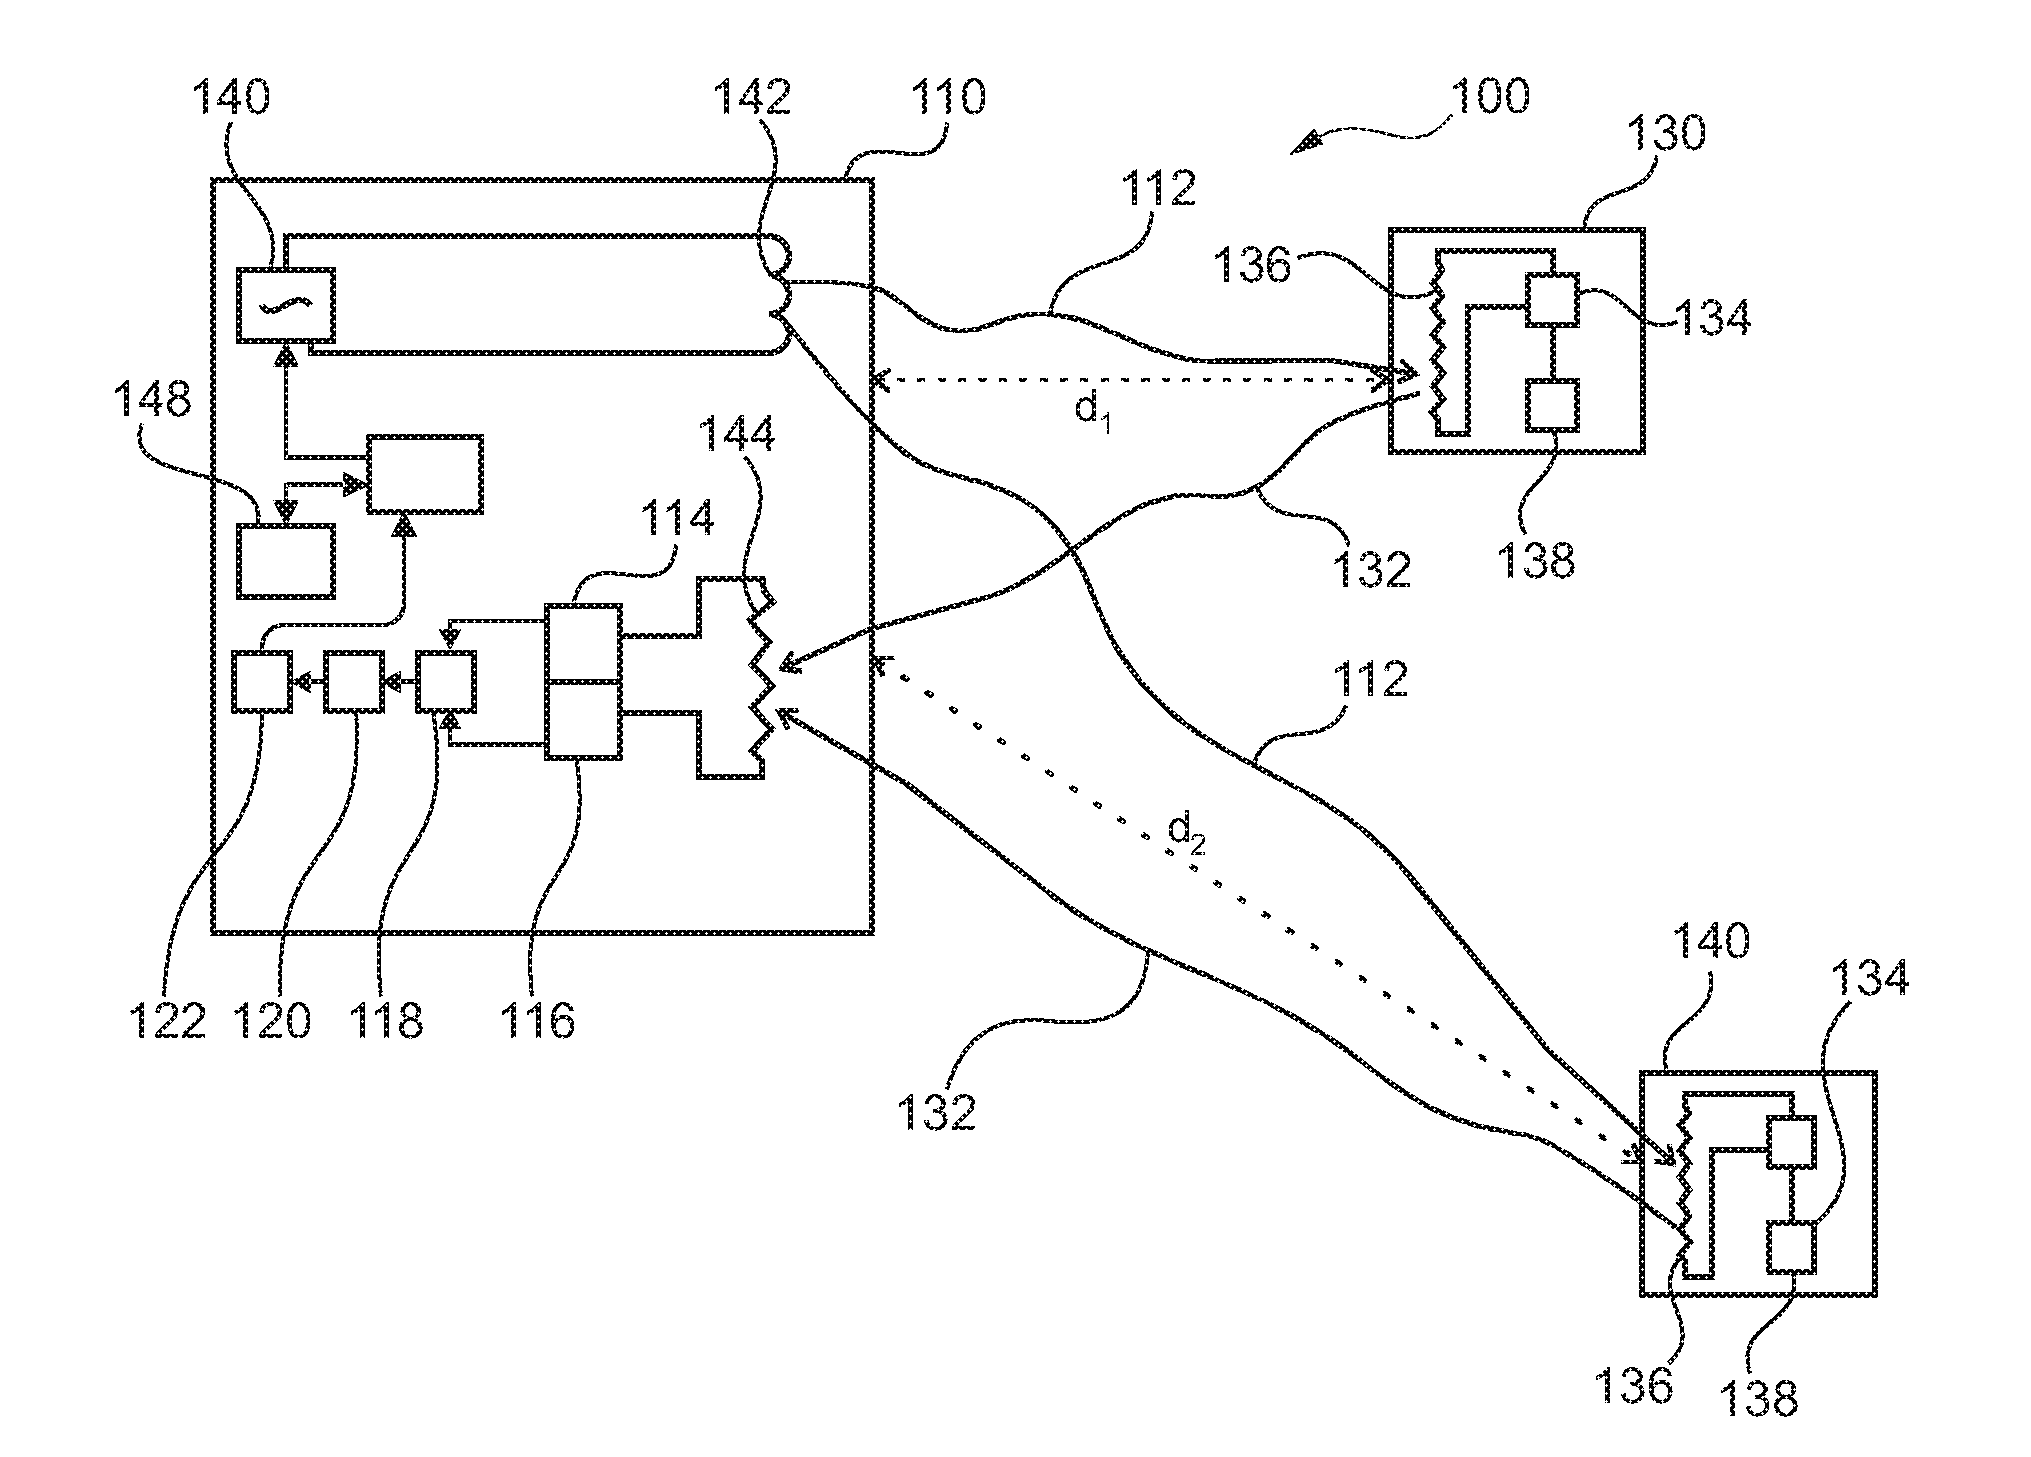  system for reading information transmitted from a transponder